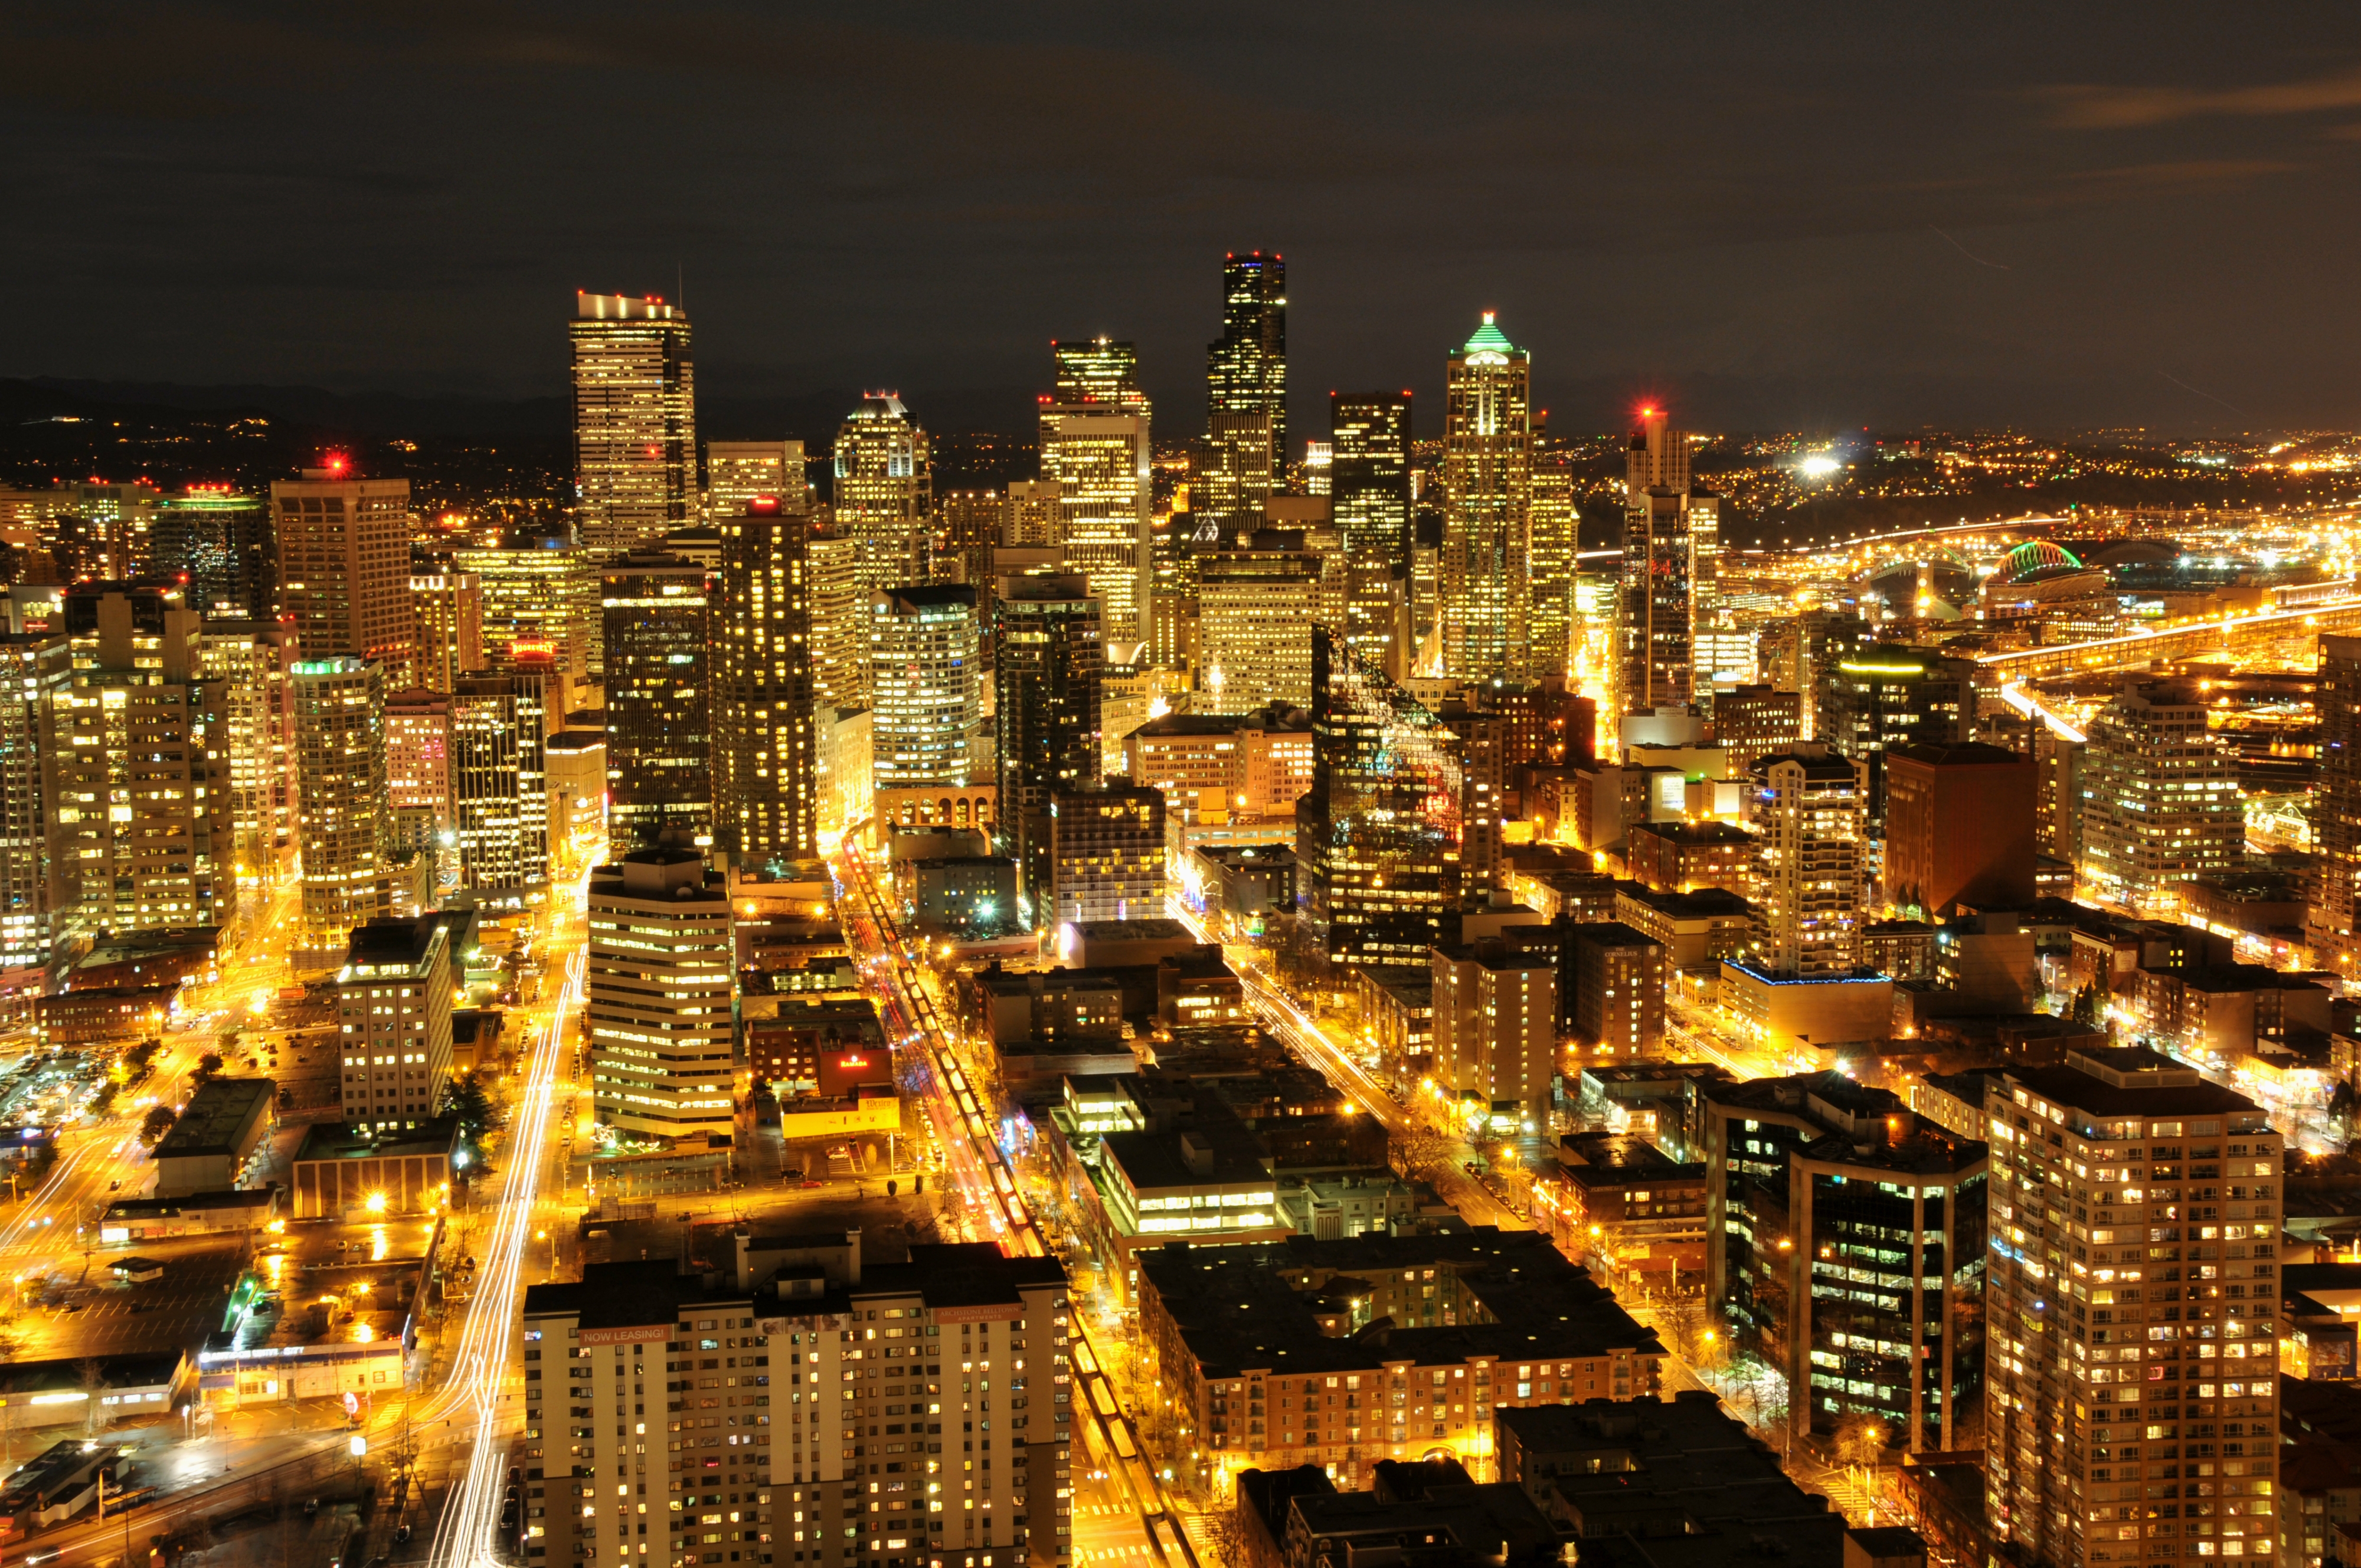 Download mobile wallpaper Washington State, Washington, Seattle, Lights, Skyscrapers, Cities, Building, United States, Night City, Backlight, Illumination, Usa for free.